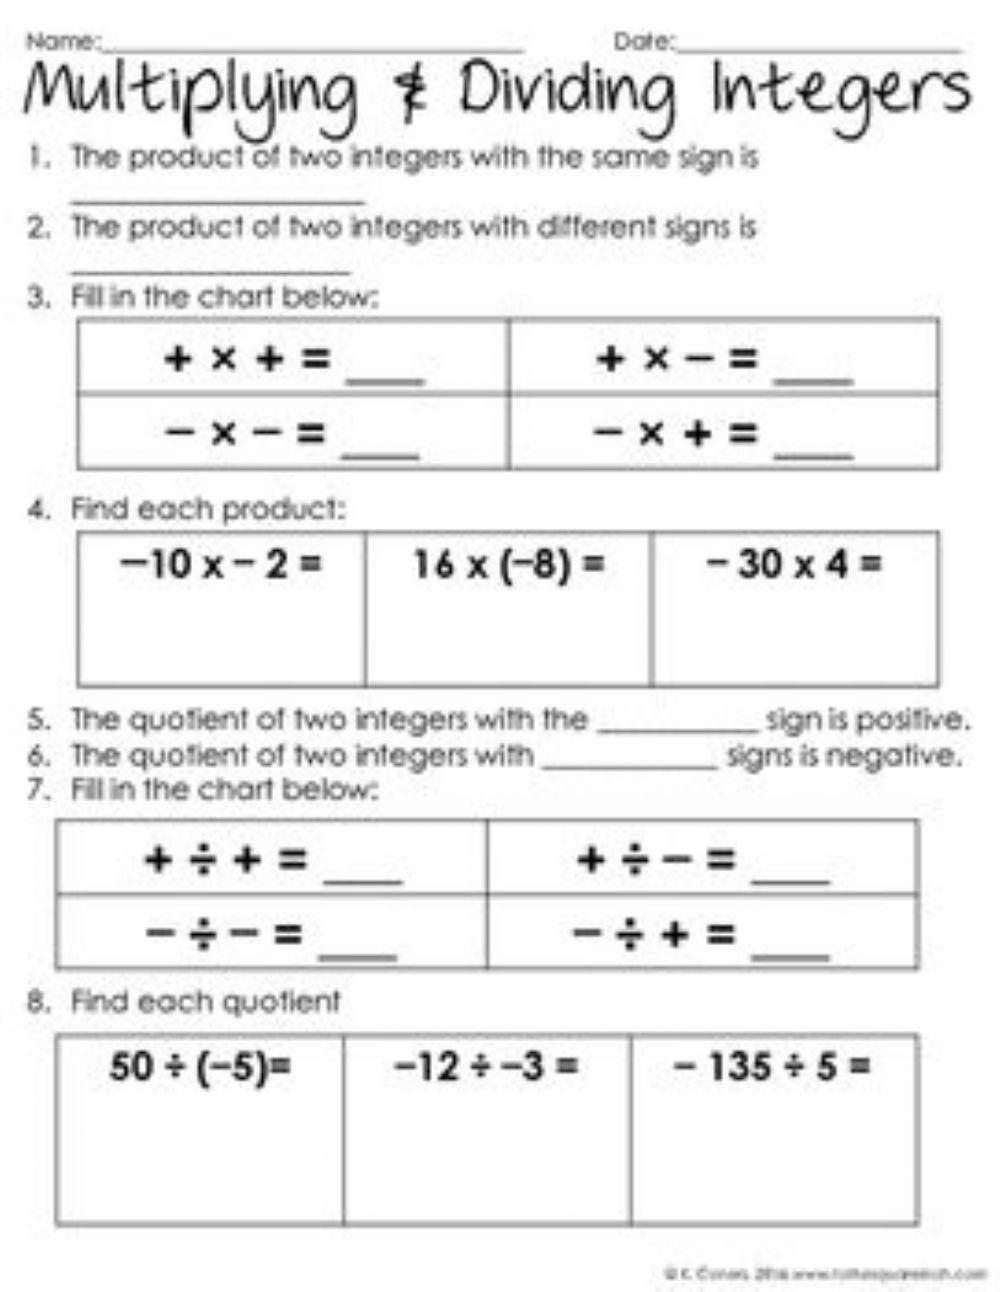 Mathematics 6 Multiplication and Division of Integers